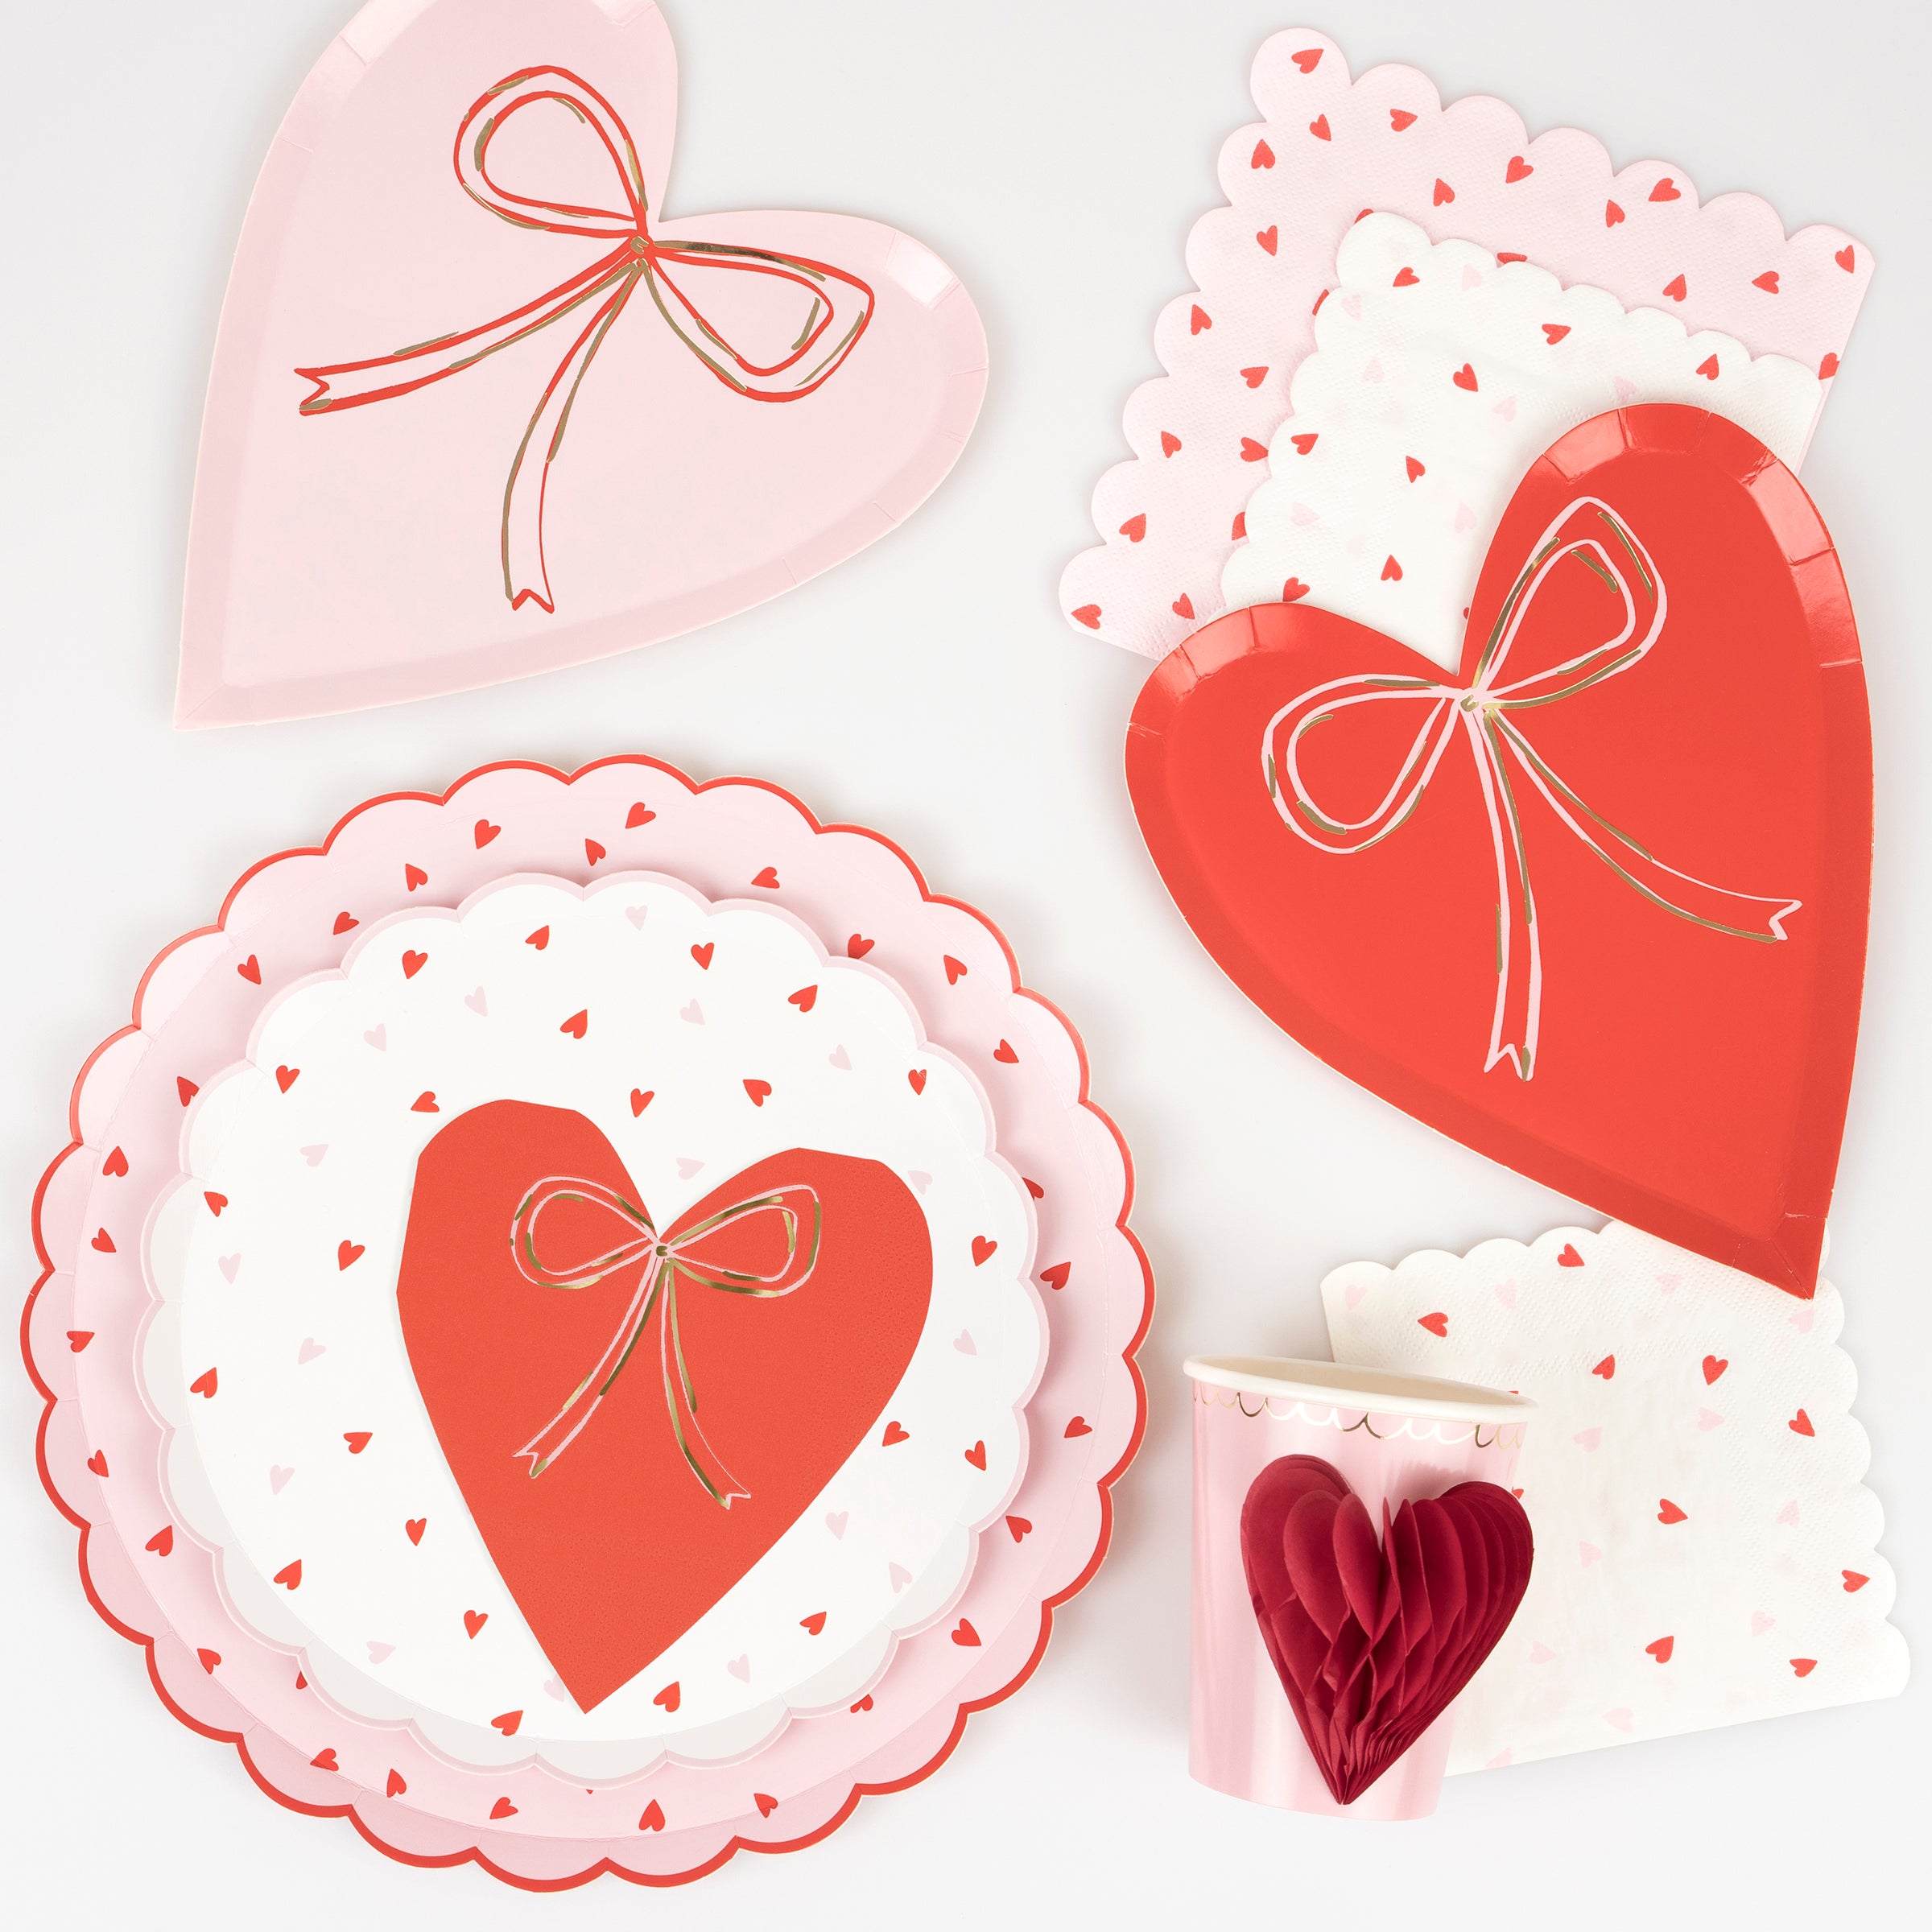 Our party plates, with red and pink hearts with on-trend bows, will look amazing for your Valentines party.